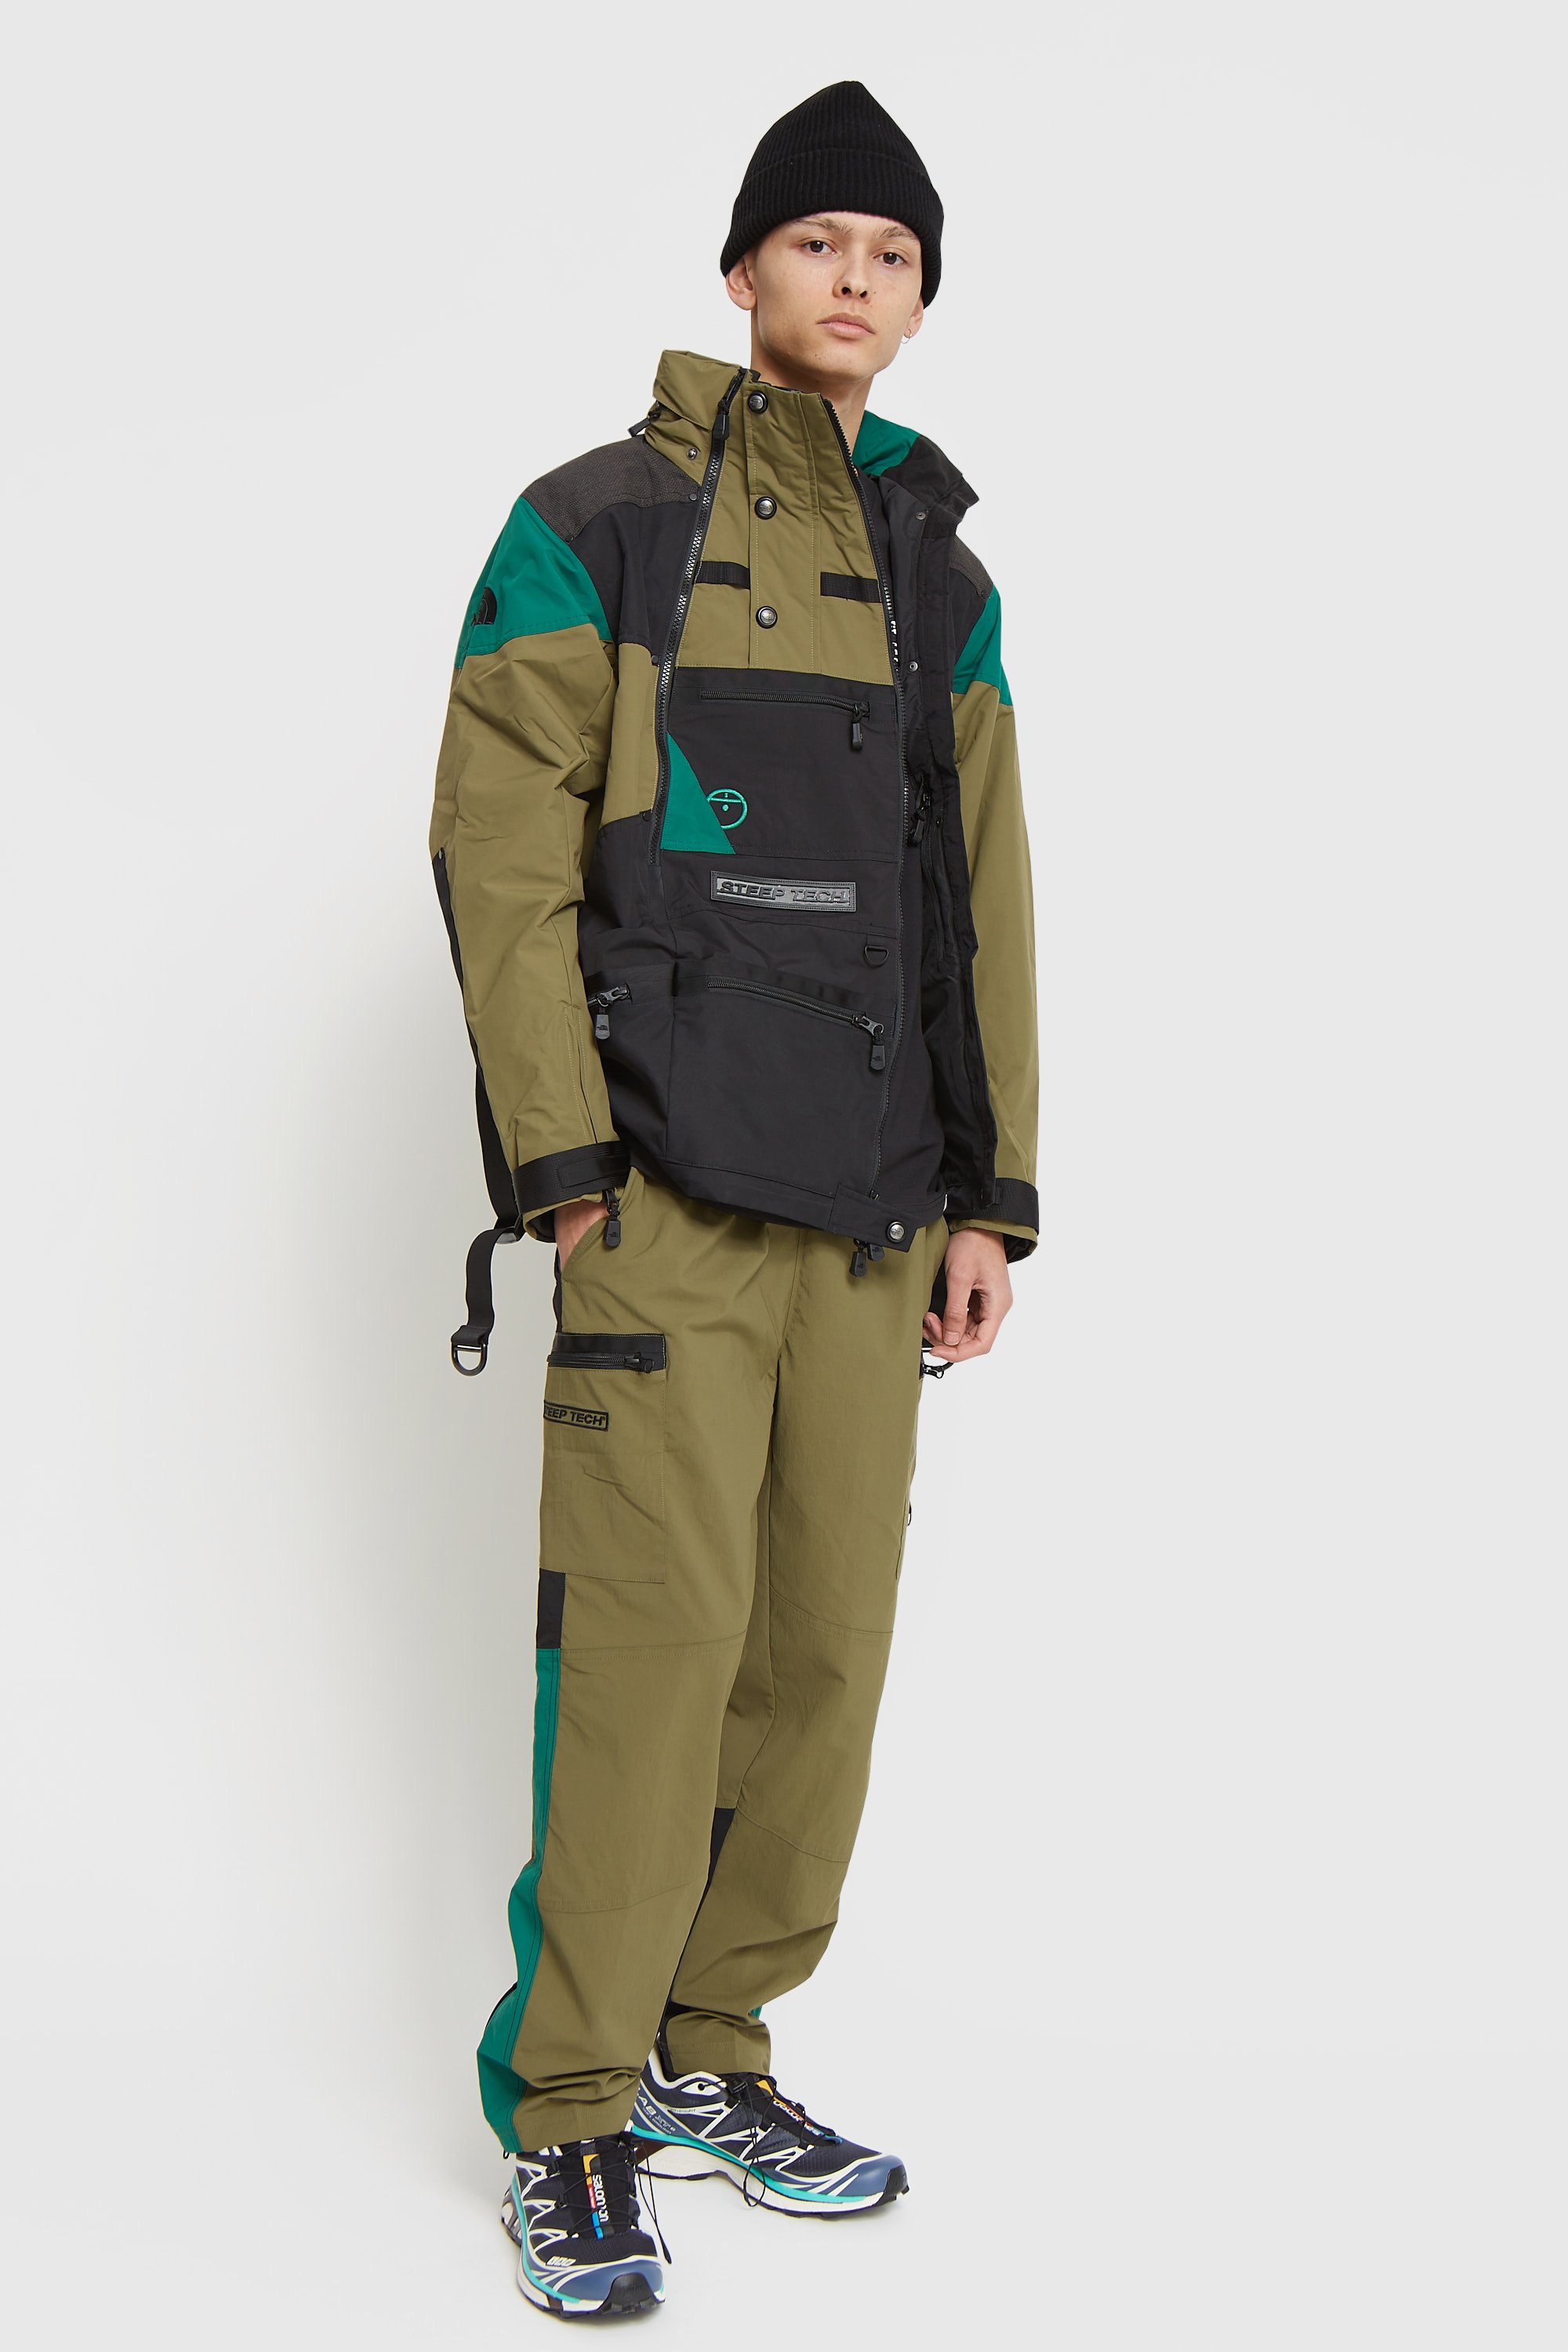 north face tech jacket